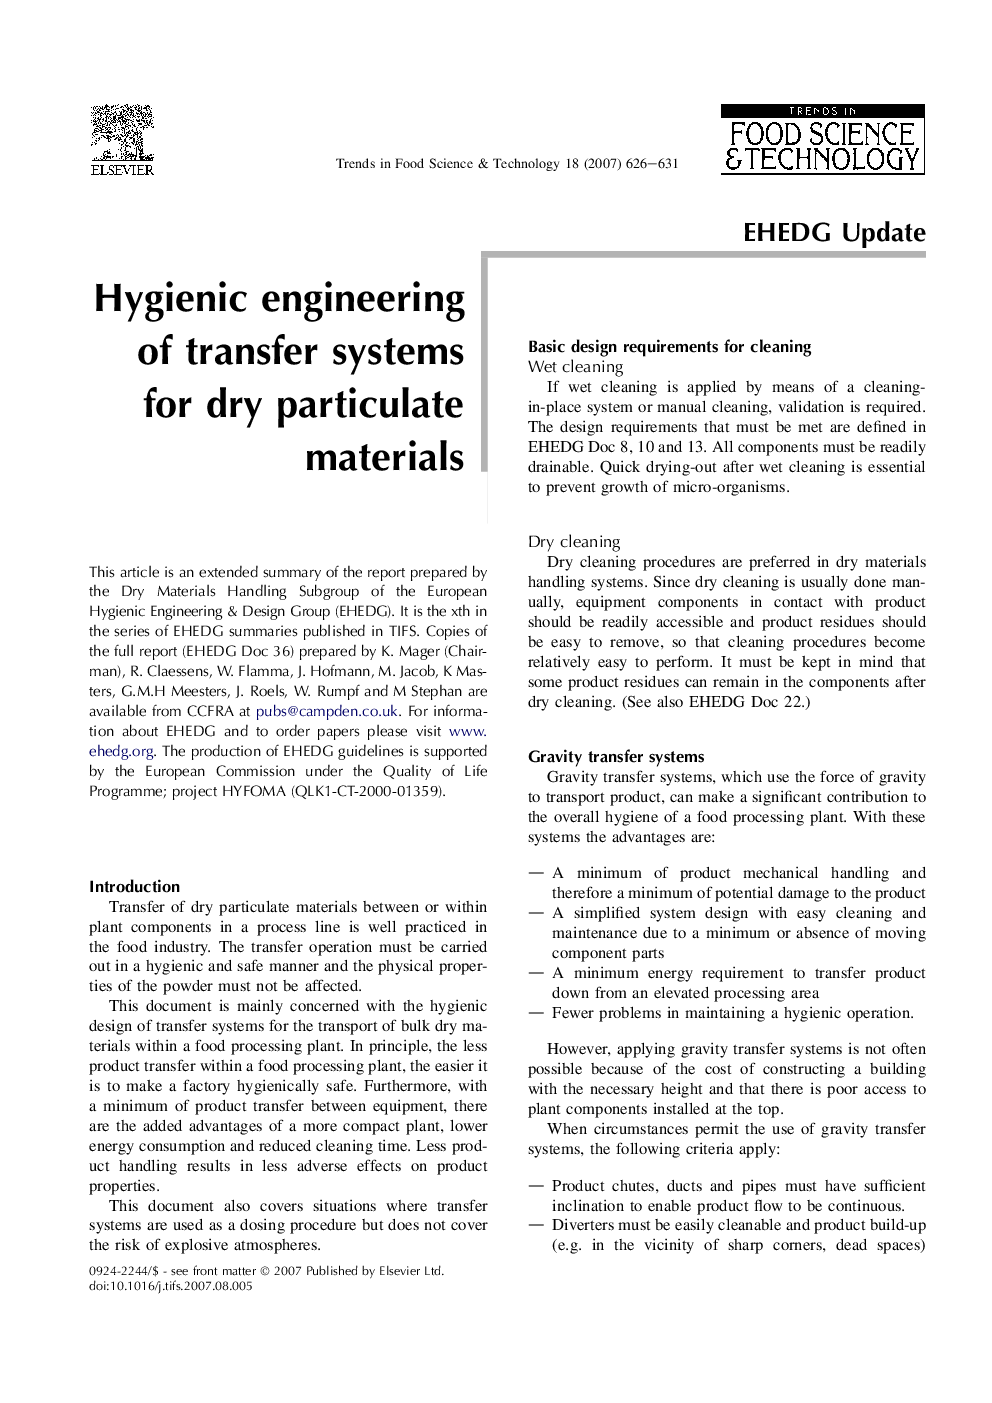 Hygienic engineering of transfer systems for dry particulate materials